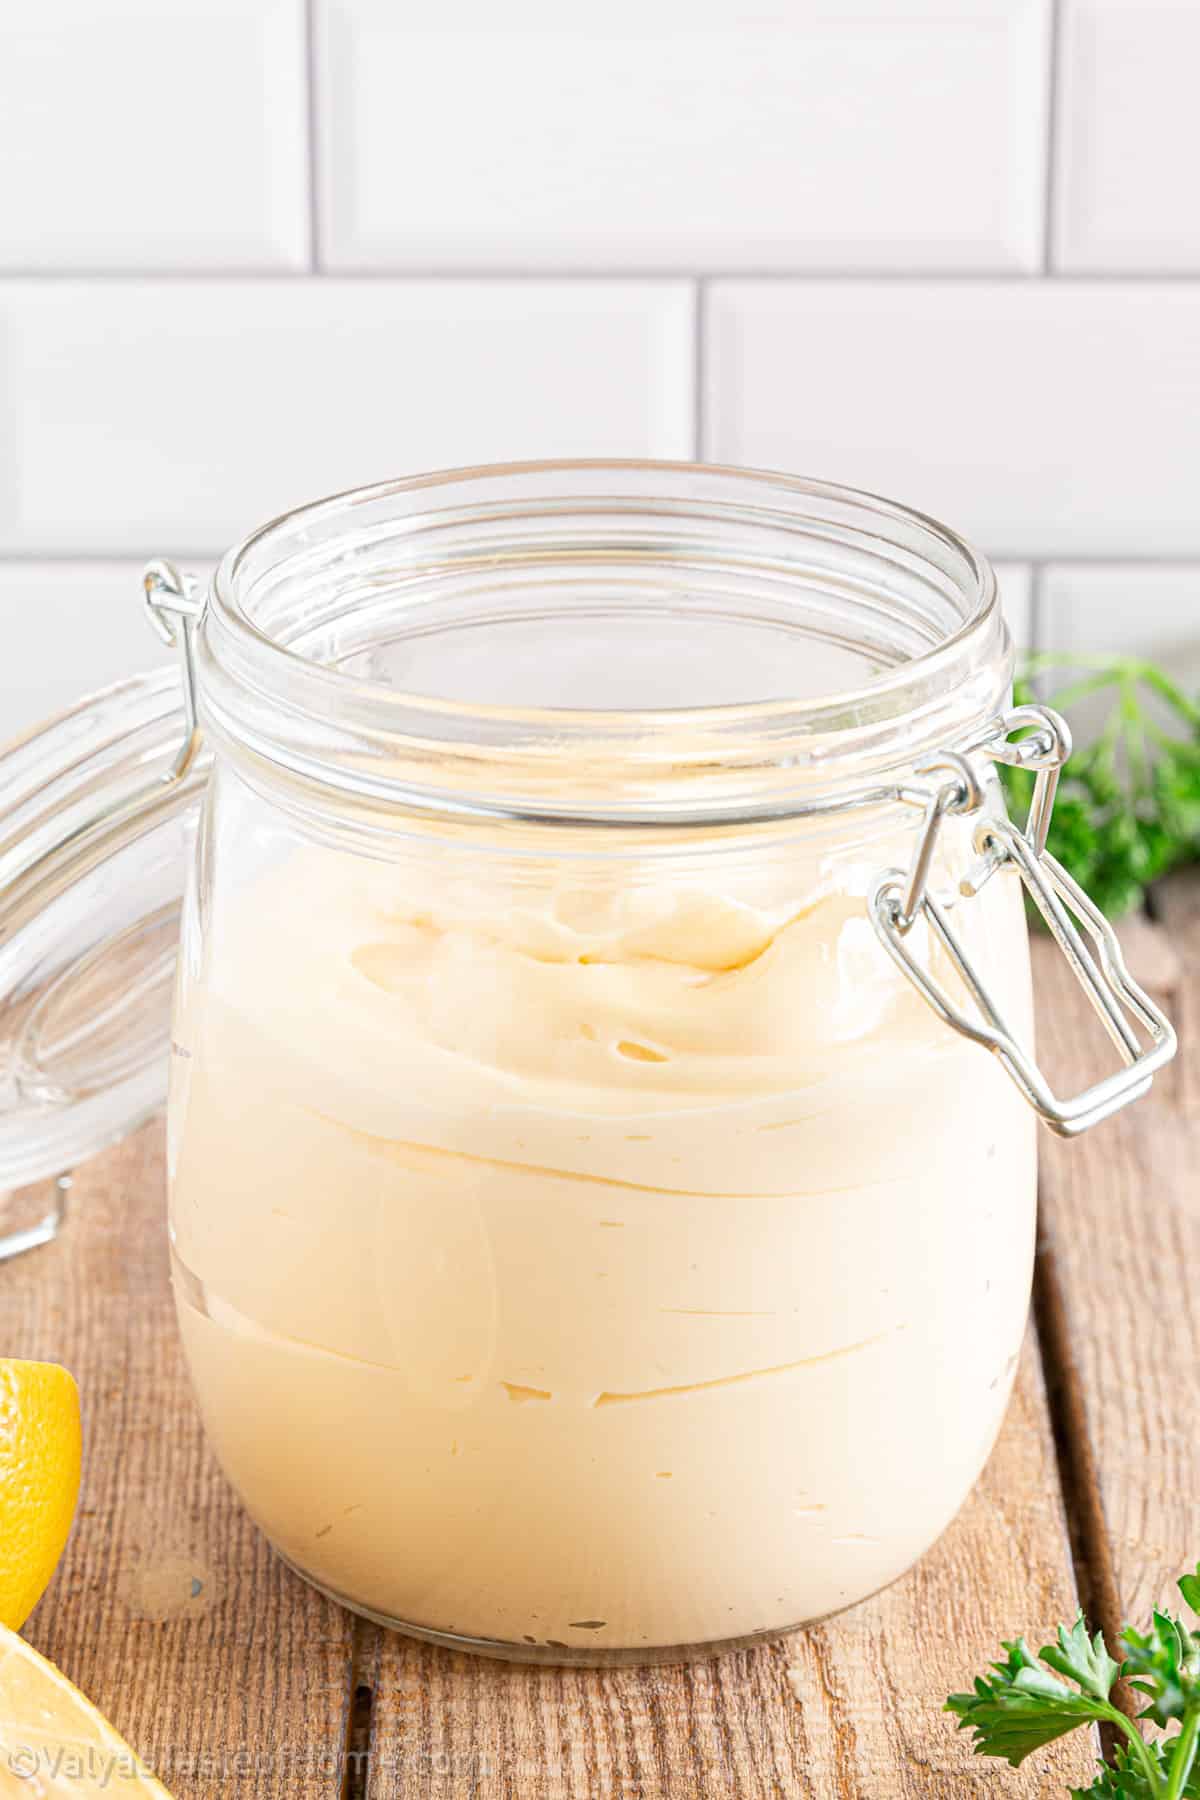 This recipe will show you how to make your own creamy, flavorful mayonnaise in just minutes.